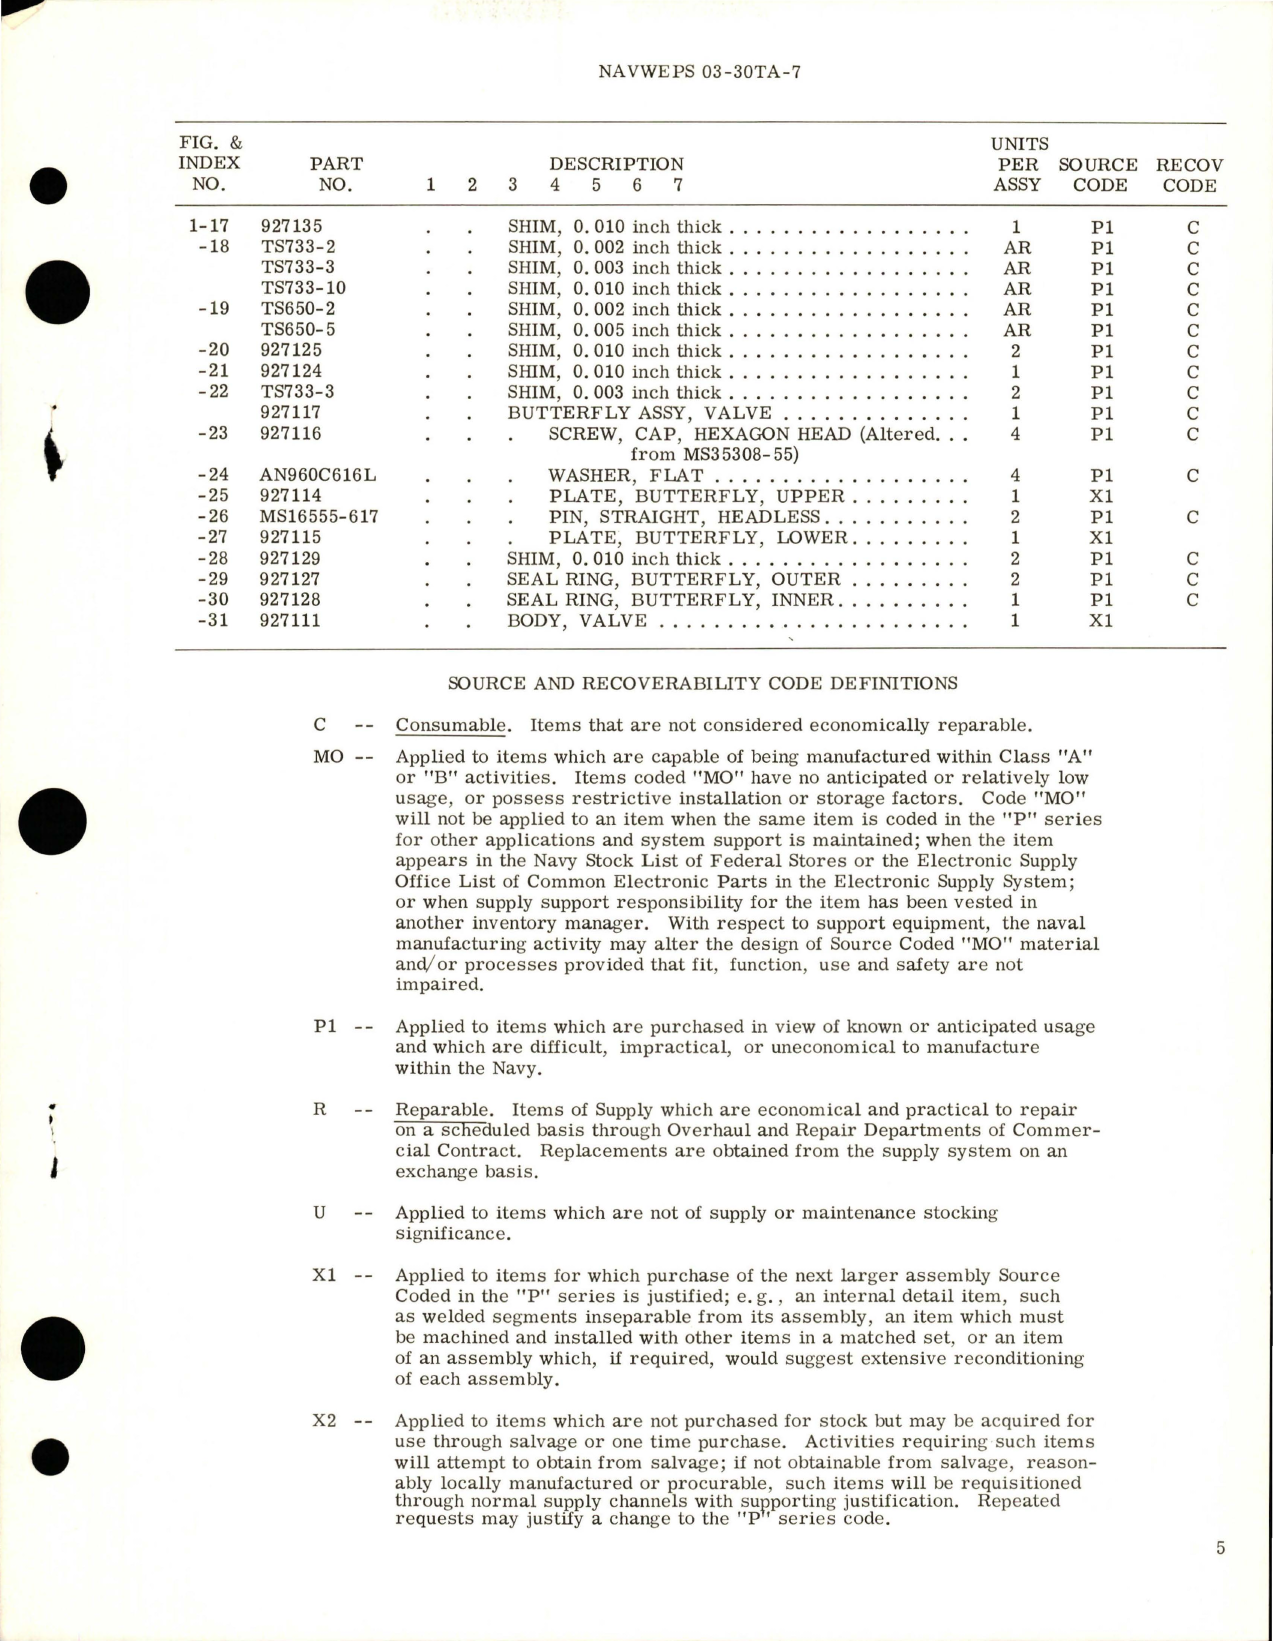 Sample page 5 from AirCorps Library document: Overhaul Instructions with Parts Breakdown for Butterfly Valve - Part 927T100